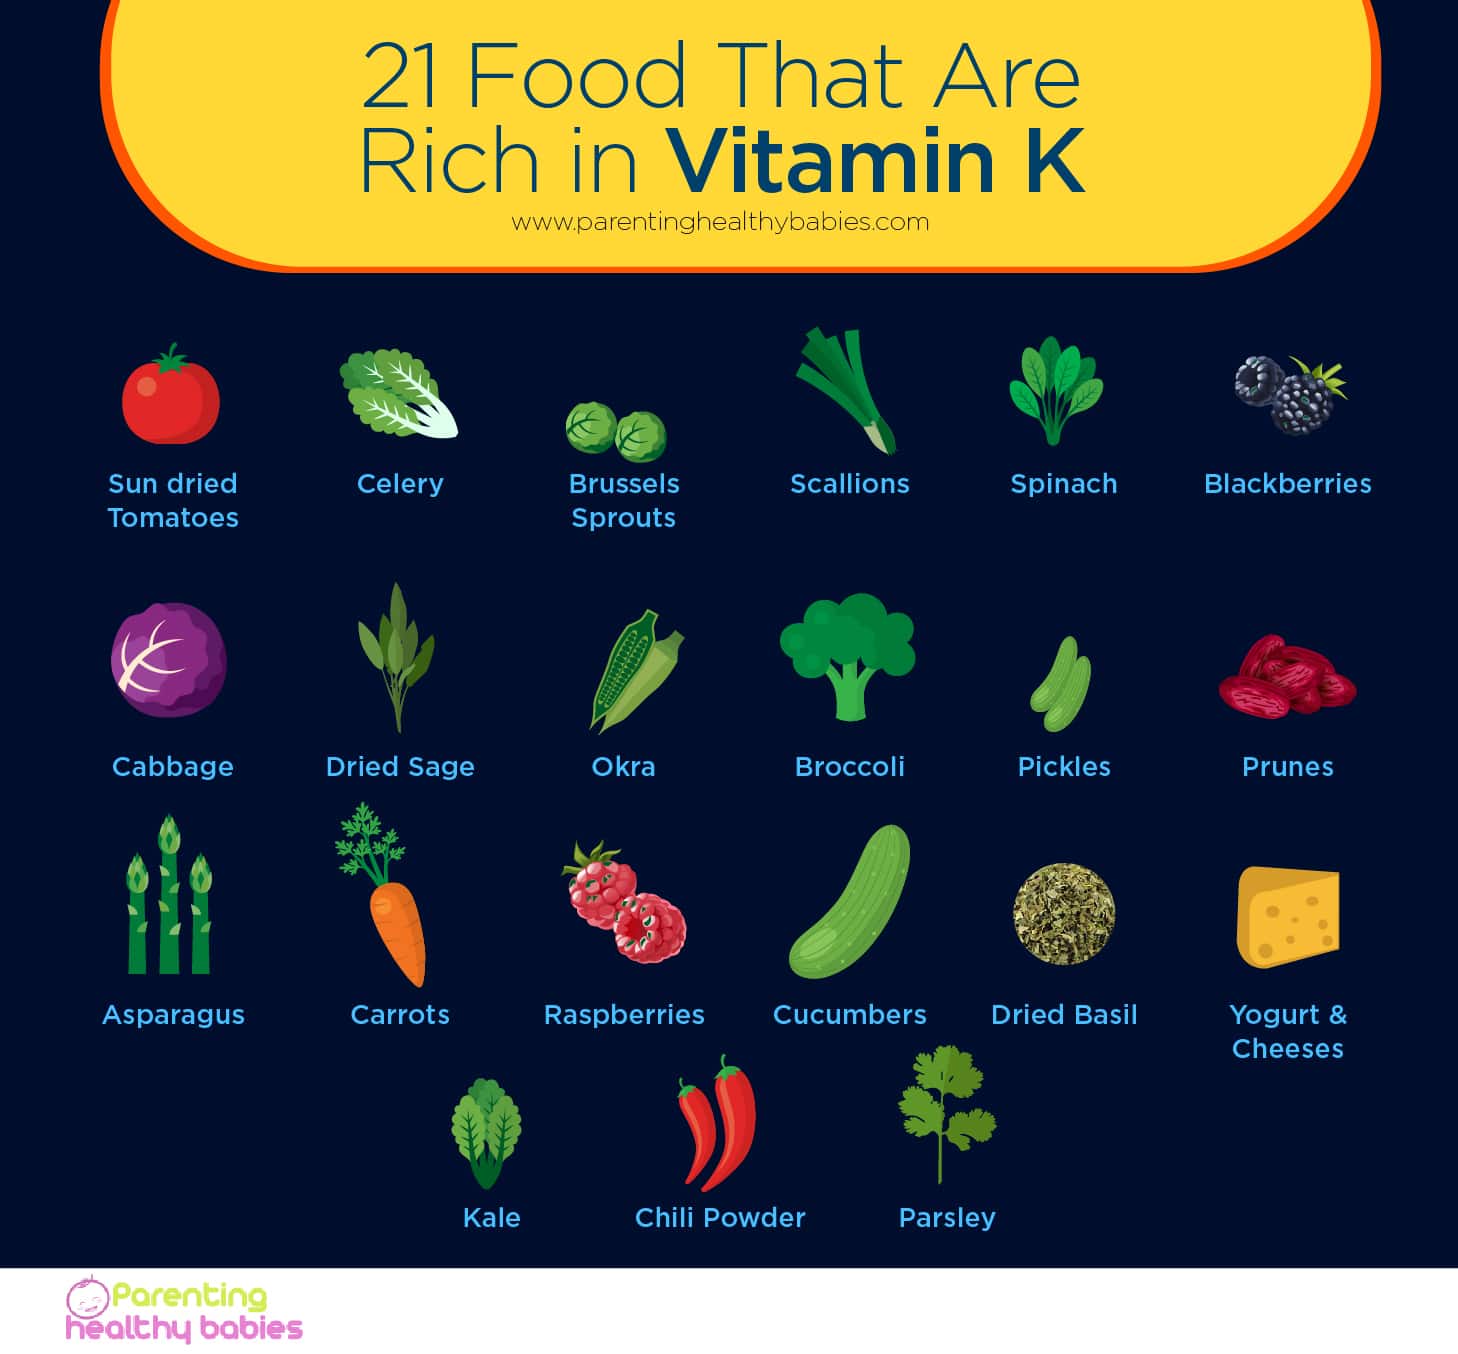 21 Food That Are Rich in Vitamin K